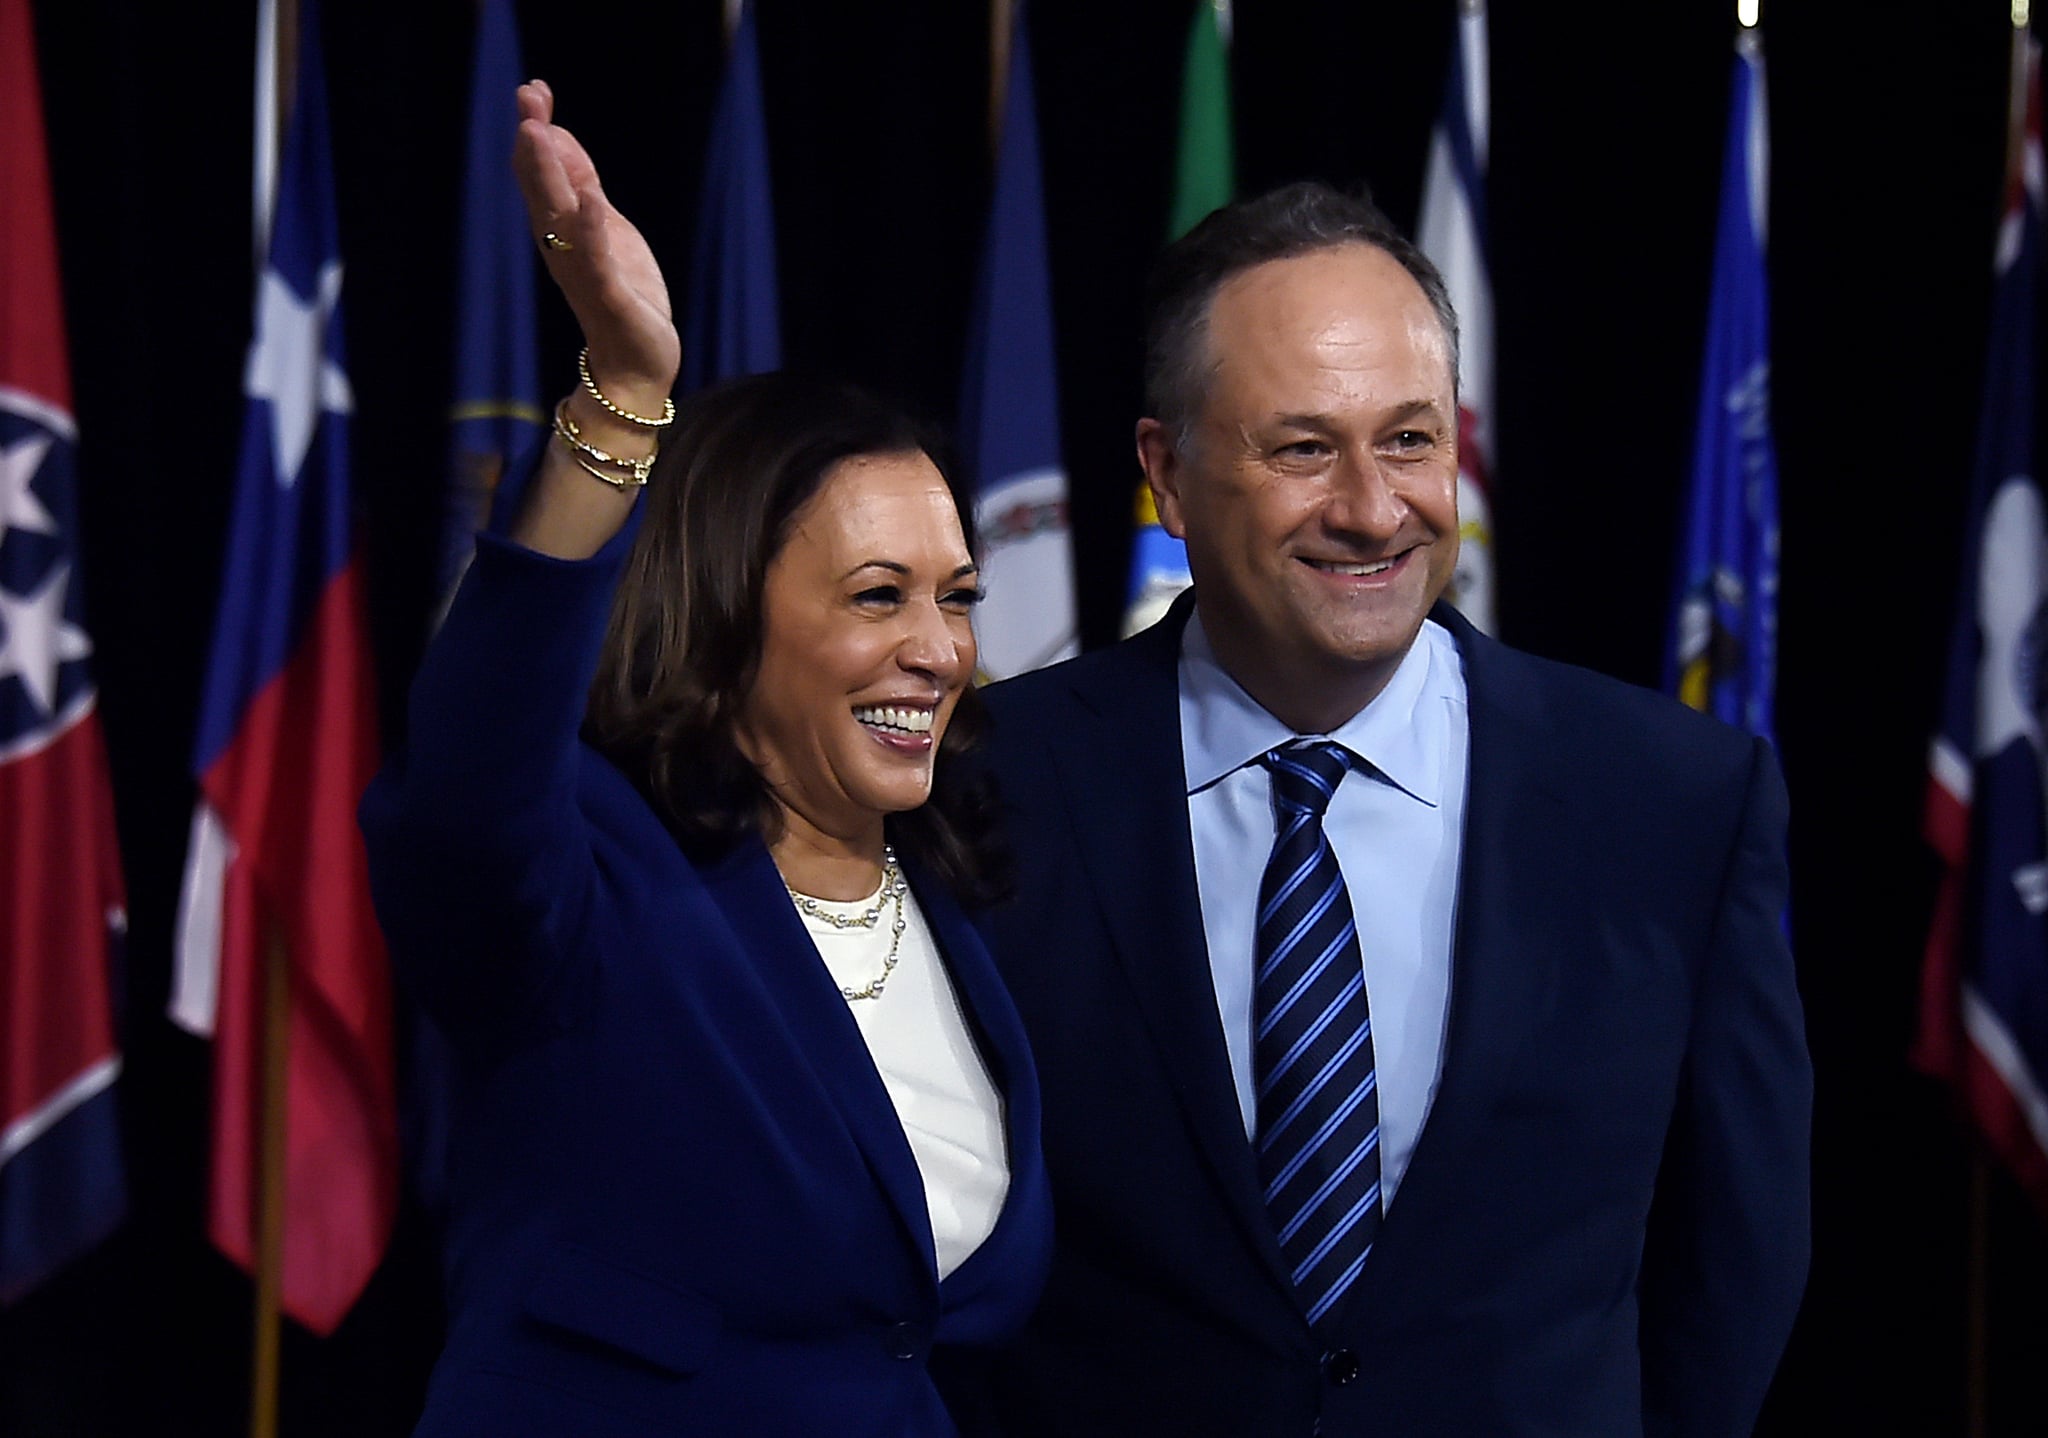 Democratic vice presidential running mate, US Senator Kamala Harris and her husband Douglas Emhoff pose on stage after the first Biden-Harris press conference in Wilmington, Delaware, on August 12, 2020. (Photo by Olivier DOULIERY / AFP) (Photo by OLIVIER DOULIERY/AFP via Getty Images)